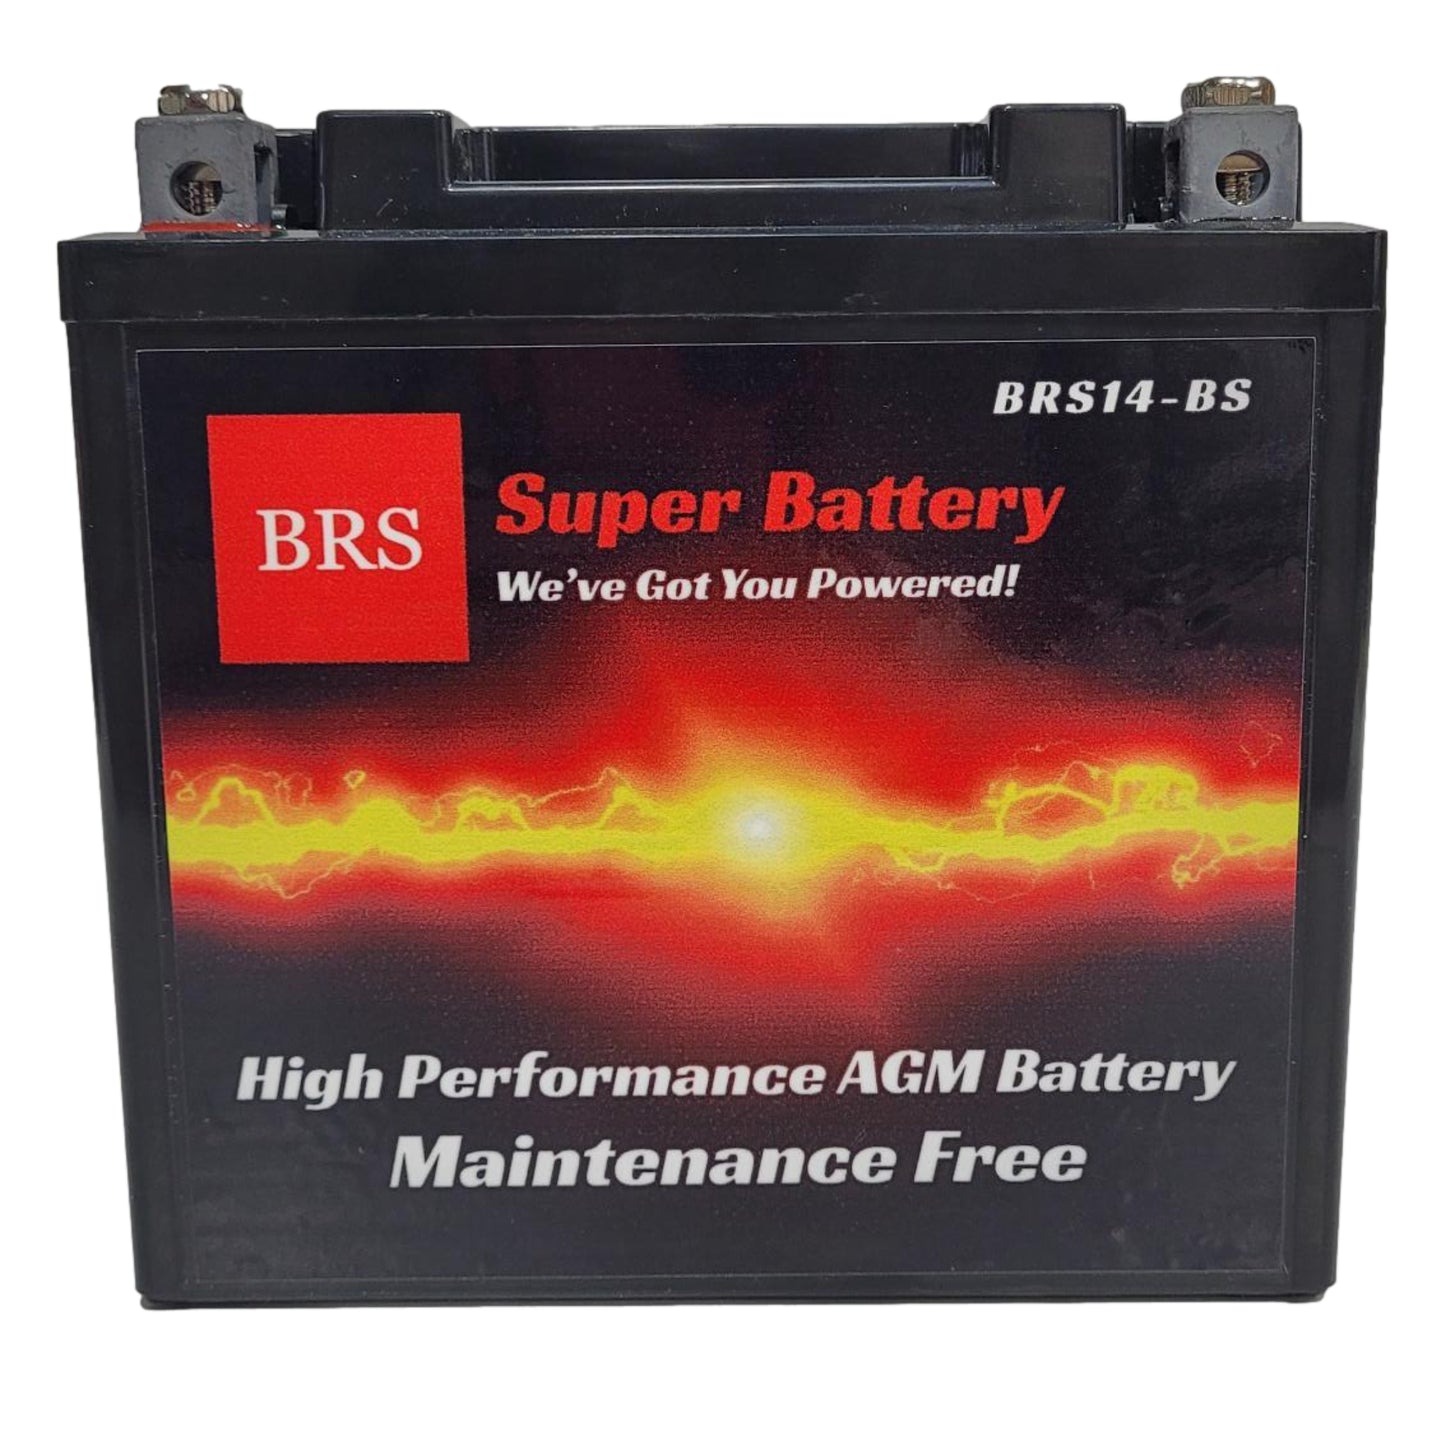 WPX14-BS 12v High Performance Sealed AGM PowerSport 2 Year Battery - BRS Super Battery